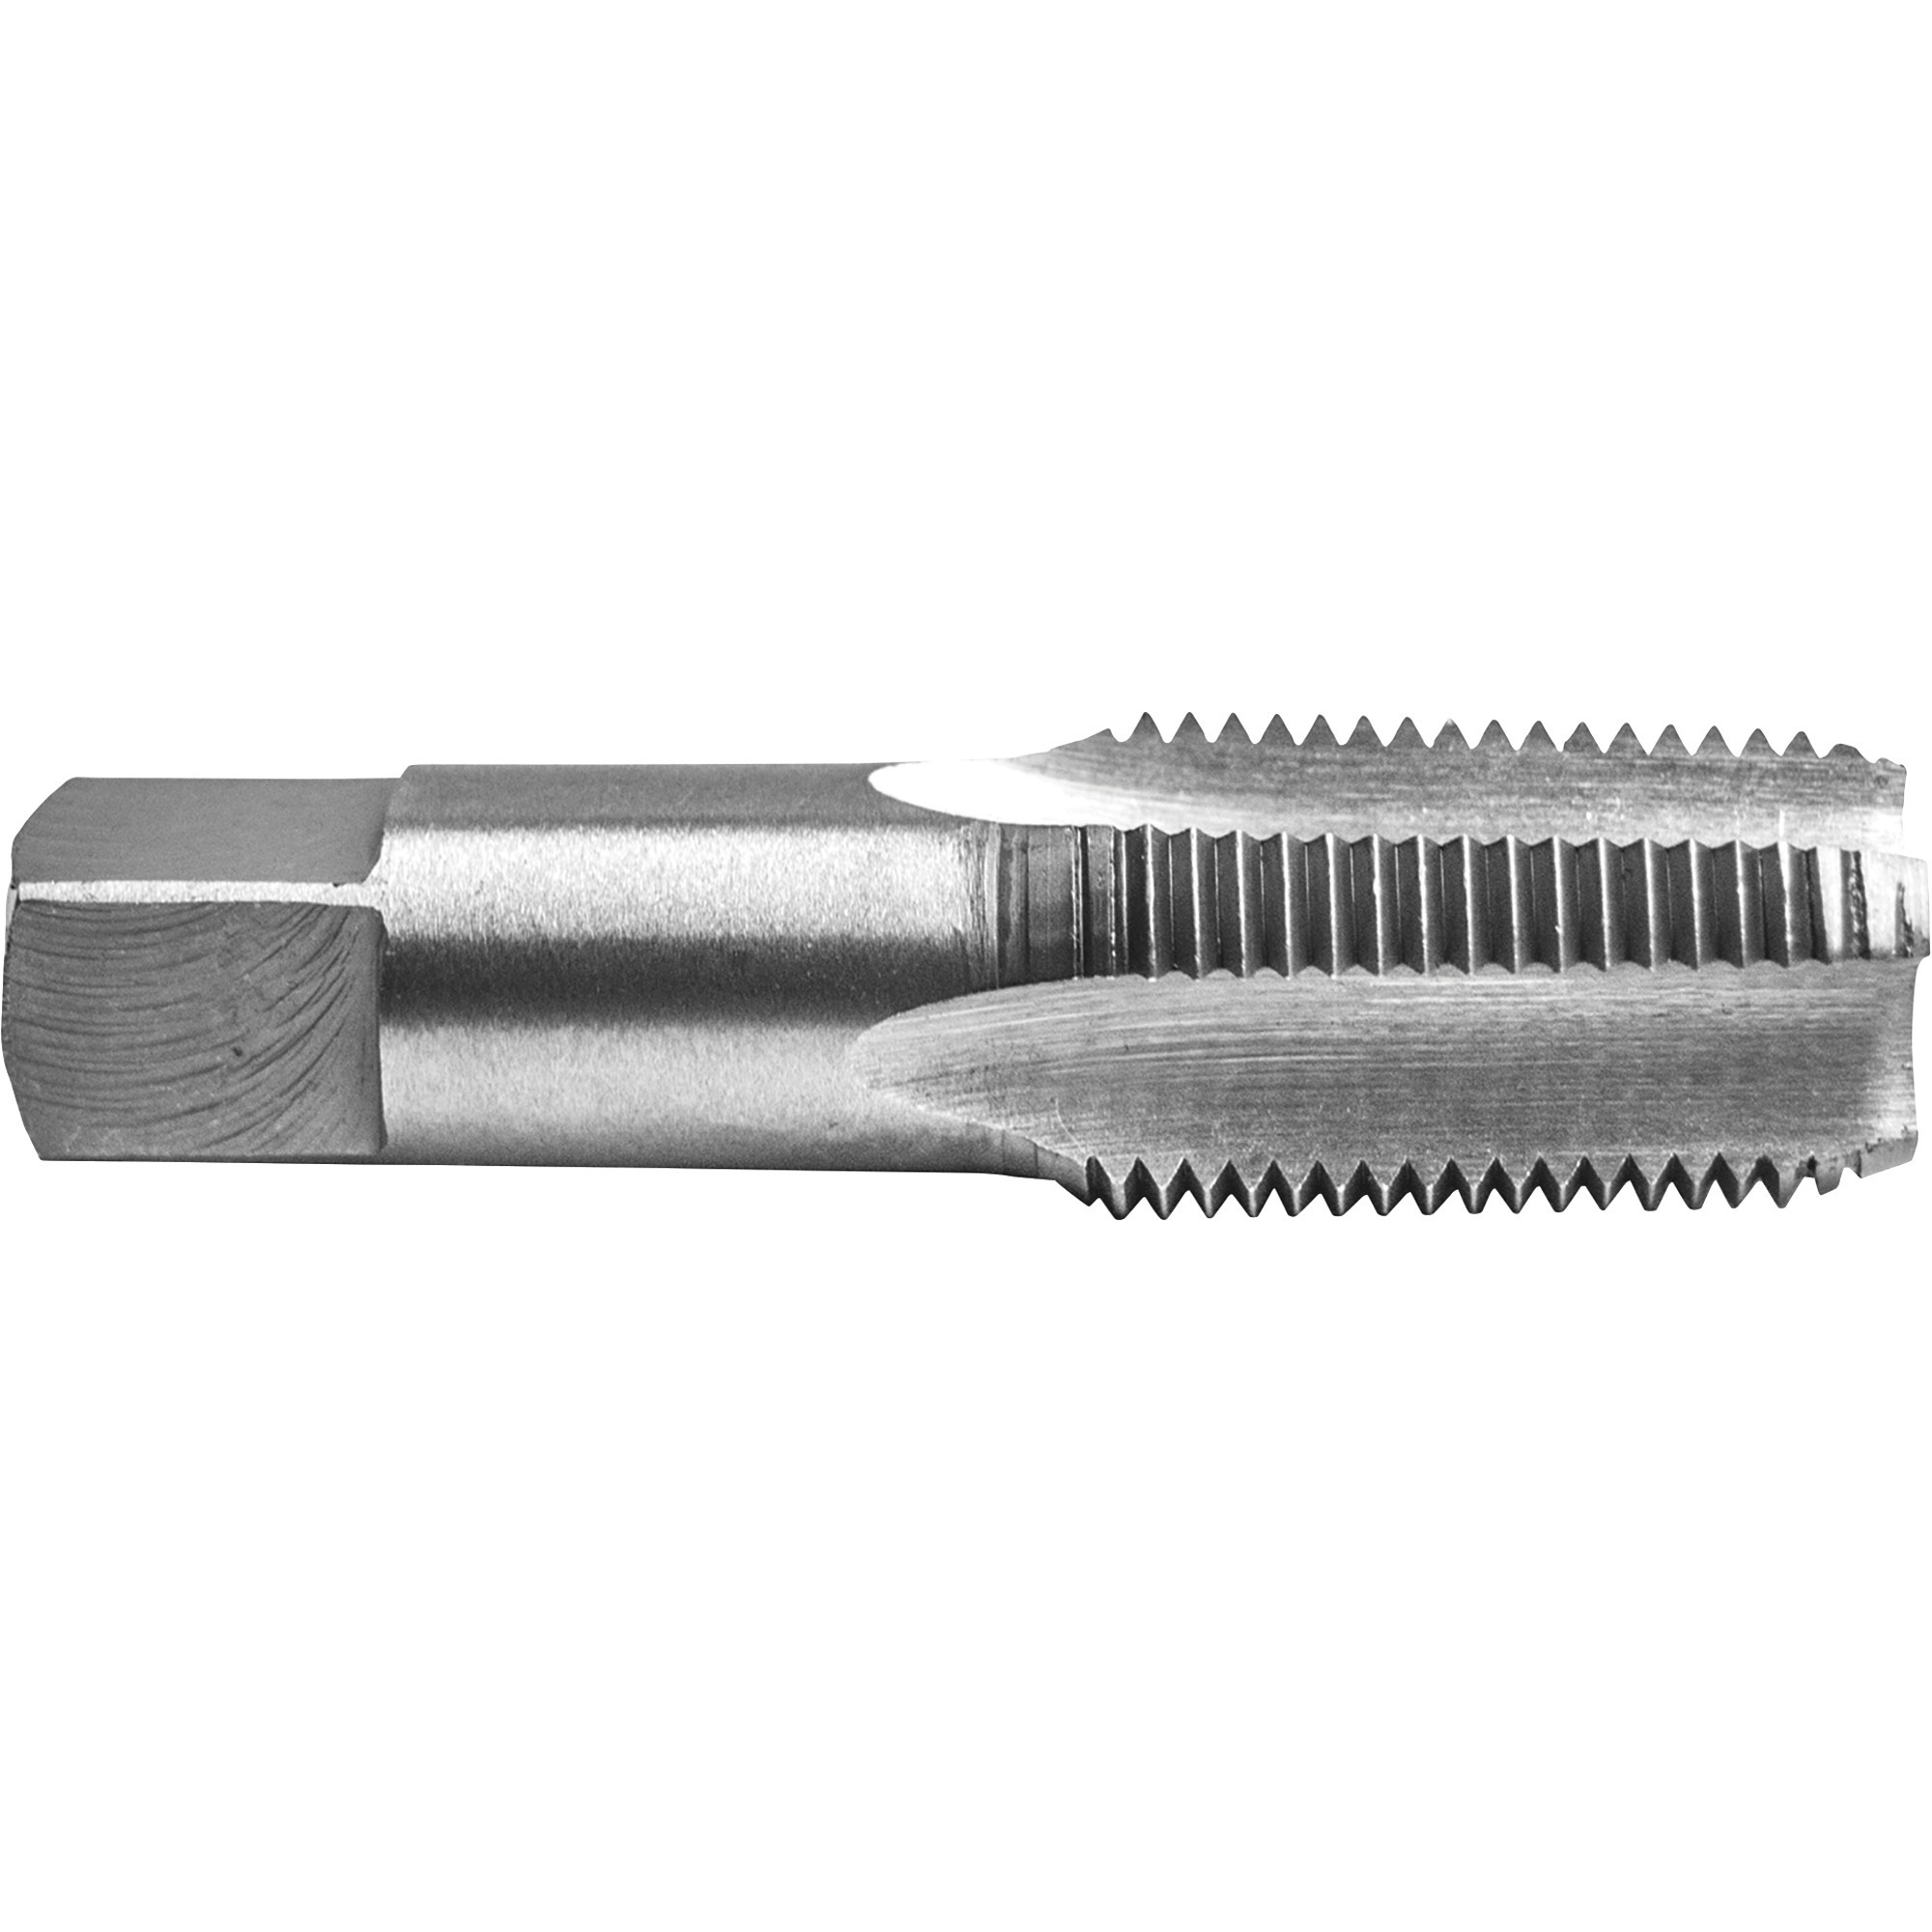 Century Drill and Tool 3/8-18 NPT Tap, Model 95203